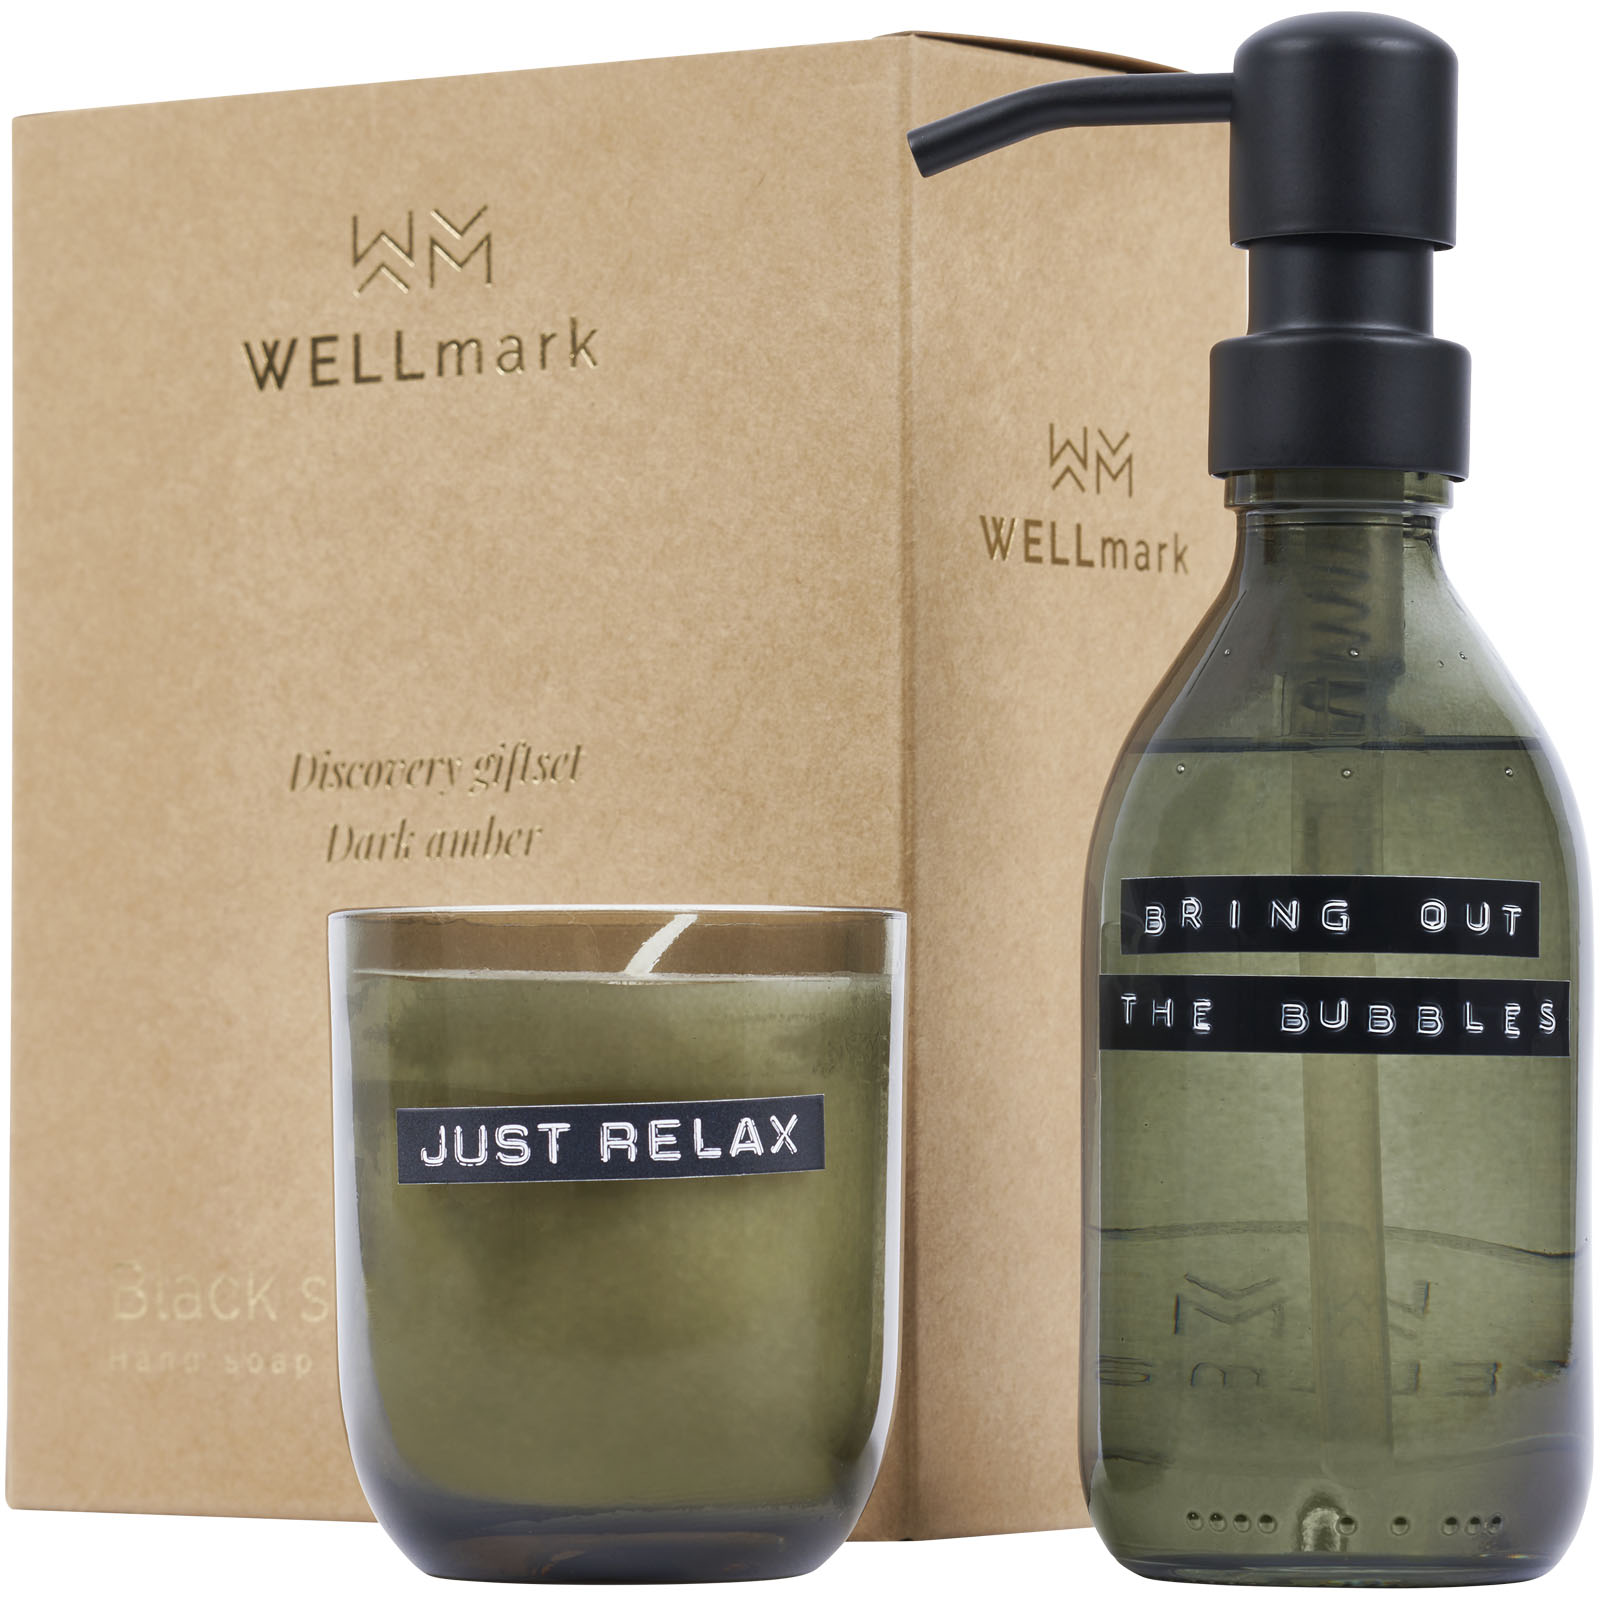 Advertising Personal Care - Wellmark Discovery 200 ml hand soap dispenser and 150 g scented candle set - dark amber fragrance